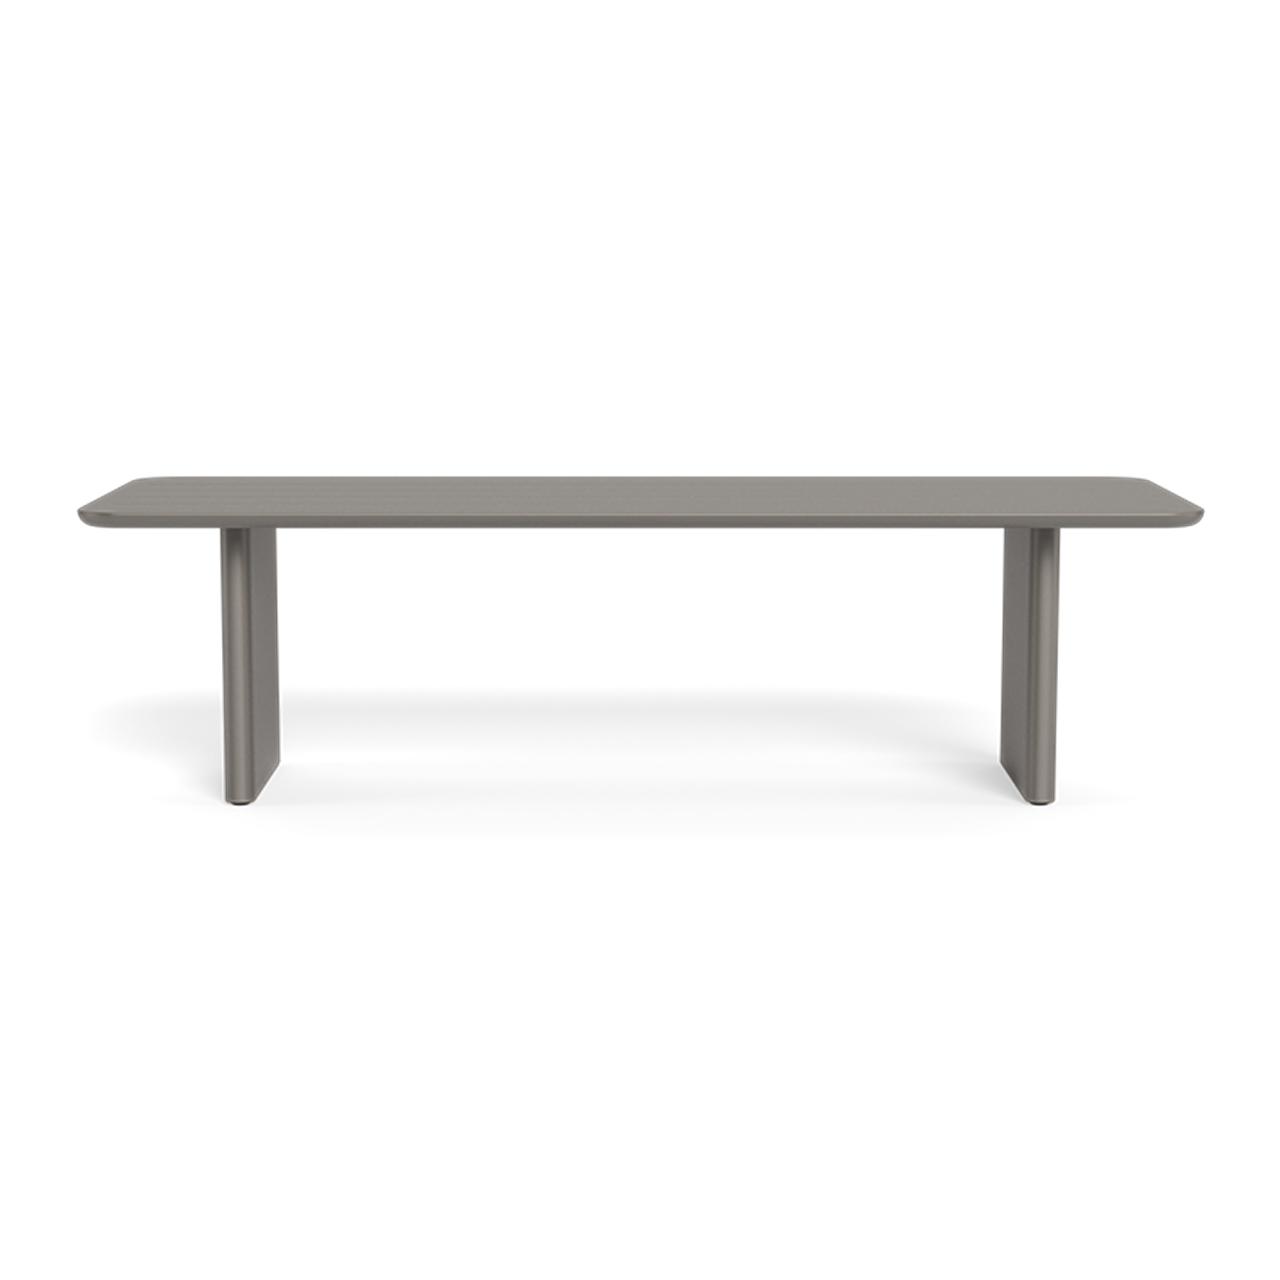 Victoria Dining Table Slatted 108" - Aluminum Frame